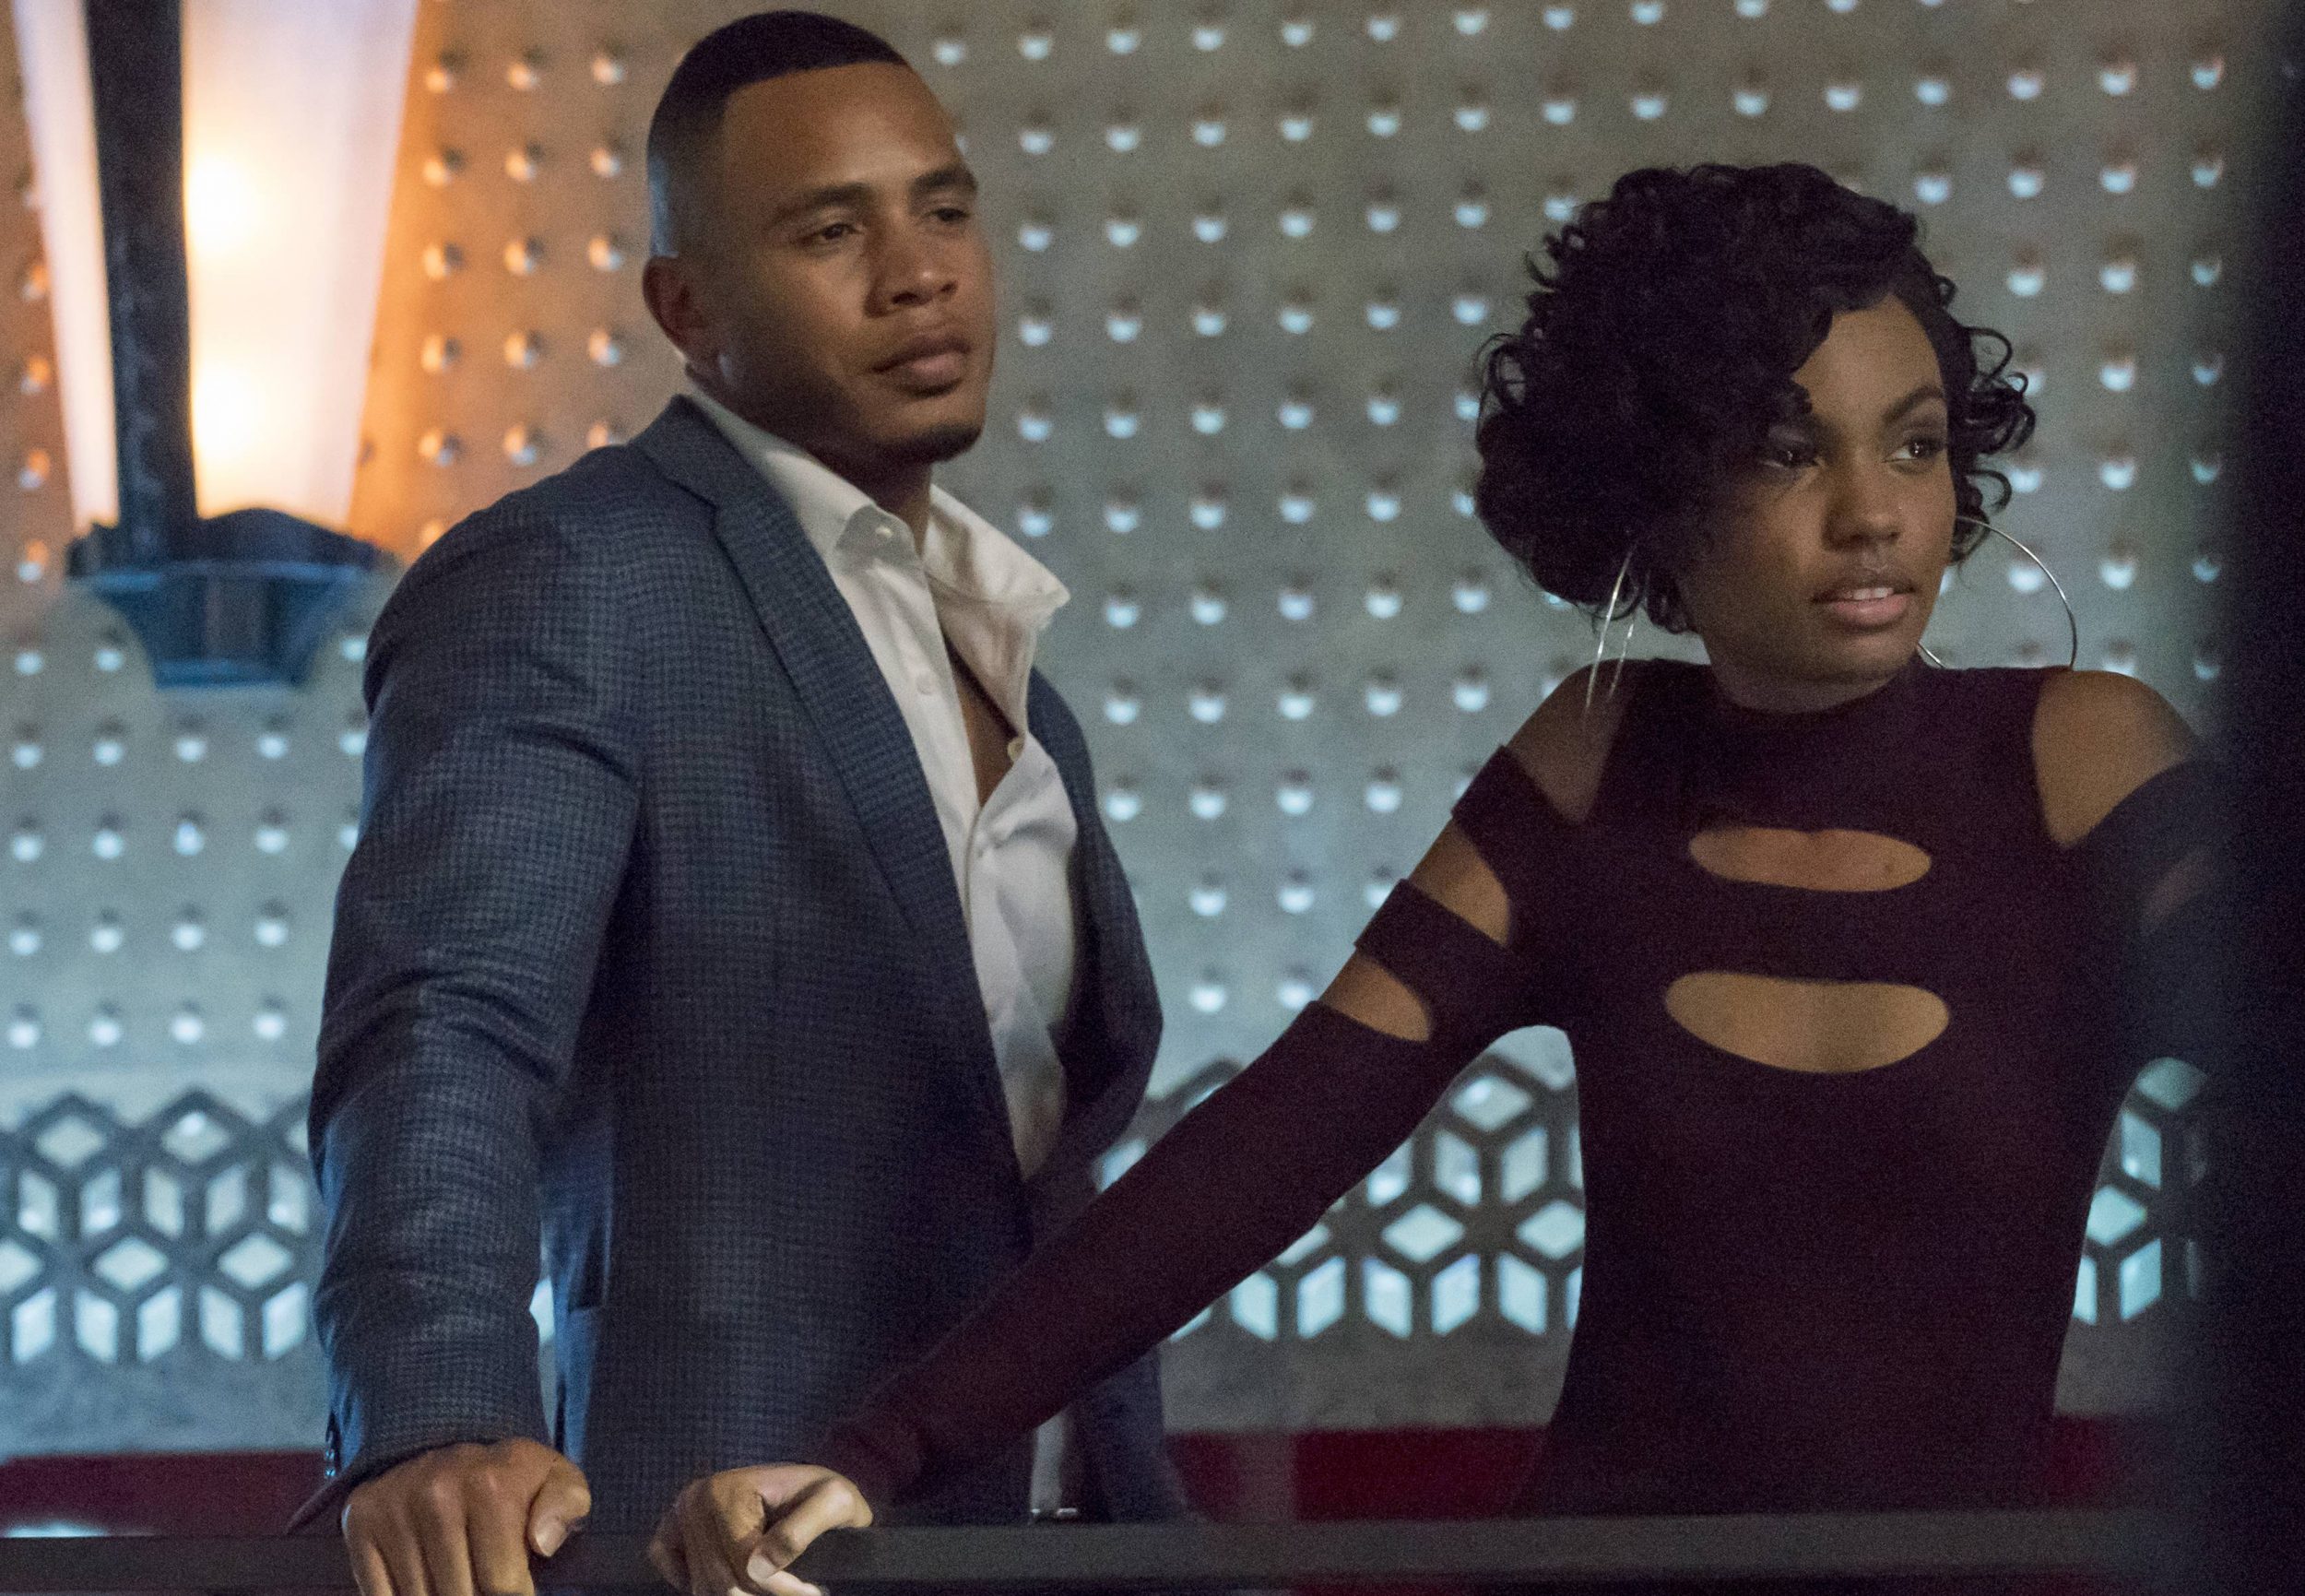 EMPIRE: Pictured L-R: Trai Byers and guest star Sierra McClain in the "The Unkindest Cut" episode of EMPIRE airing Dec. 7 (9:00-10:00 PM ET/PT) on FOX. ©2016 Fox Broadcasting Co. CR: Chuck Hodes/FOX